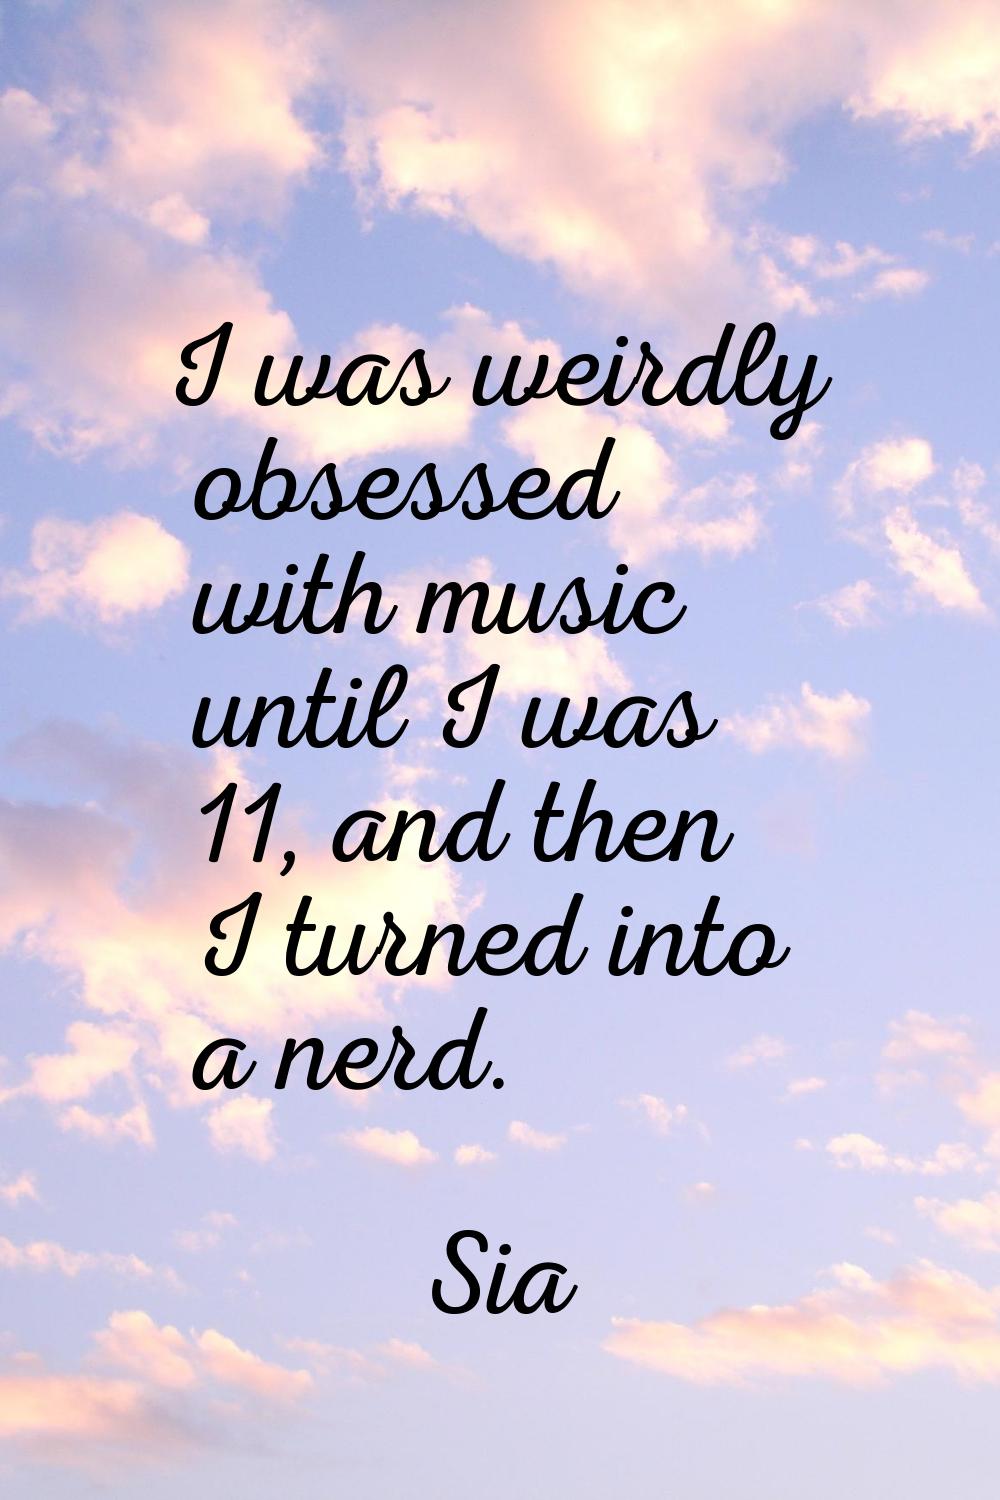 I was weirdly obsessed with music until I was 11, and then I turned into a nerd.